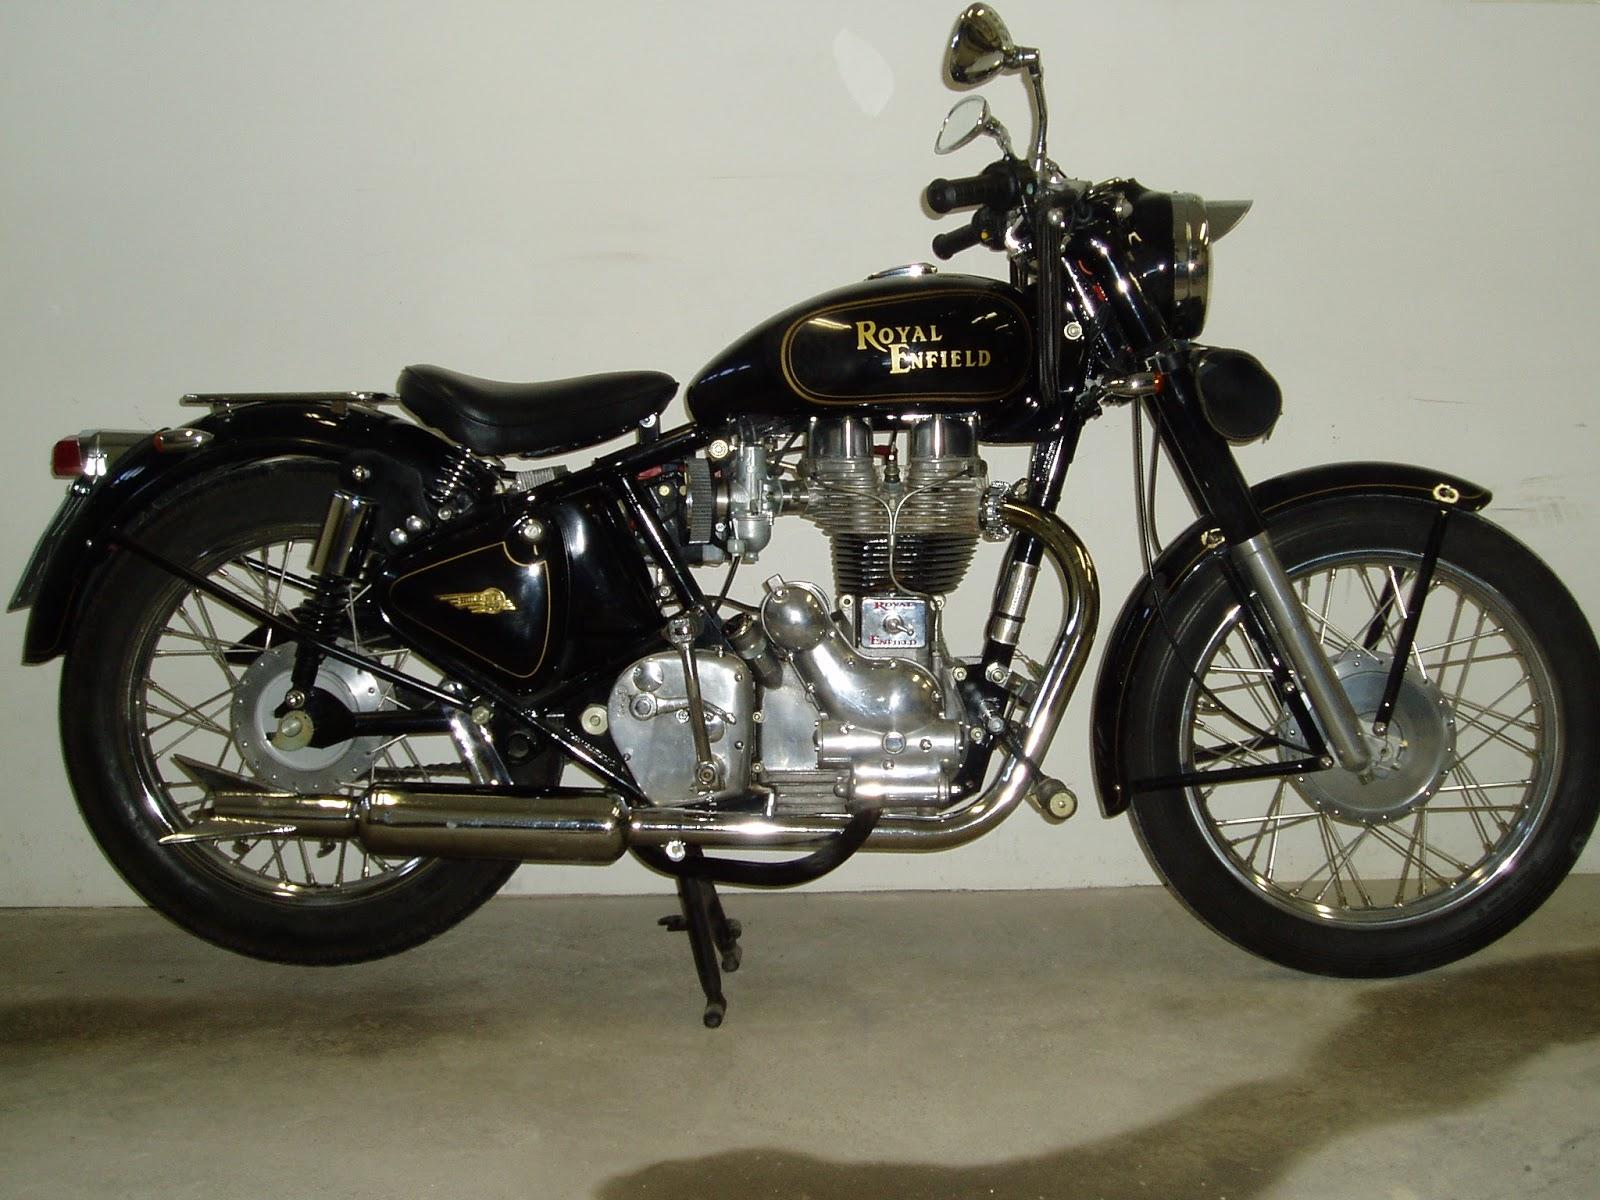 Online Wallpaper Shop: Royal Enfield Bullet Motorcycle Picture